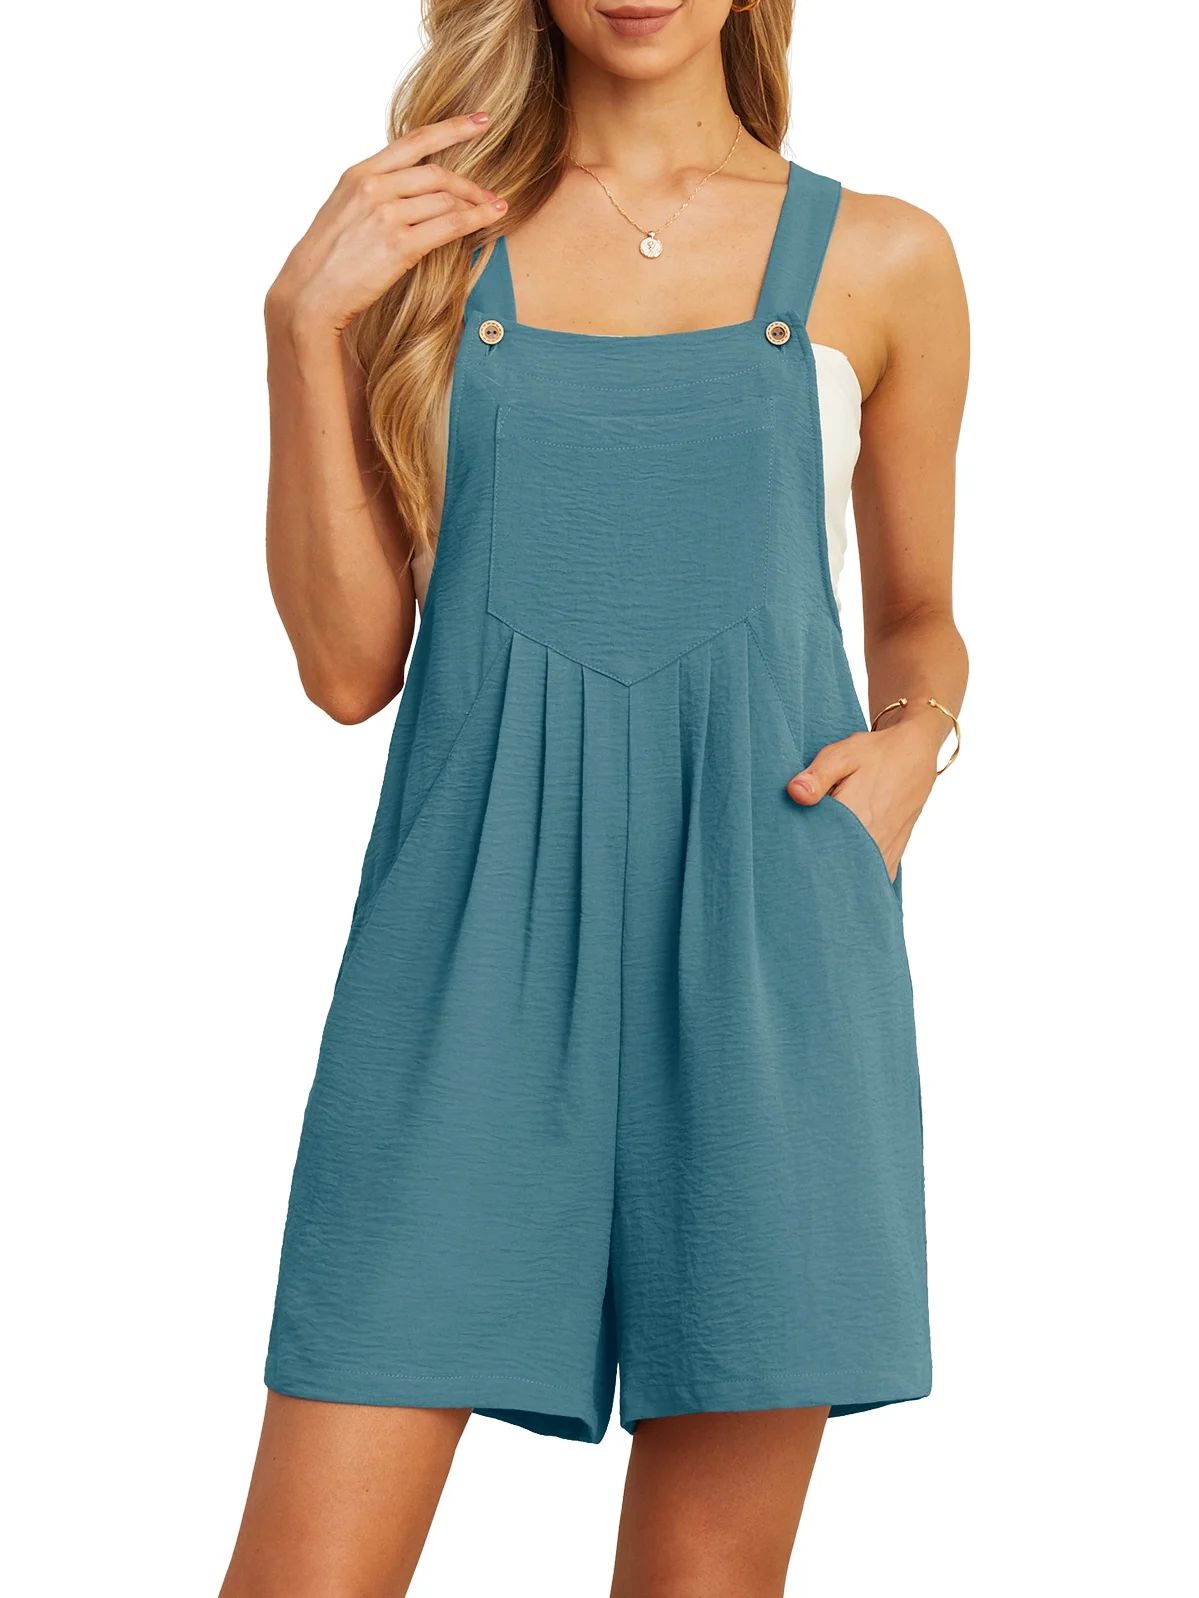 Cueply Women's Short Overalls Casual Summer Rompers Adjustable Strap Shorts Jumpsuit with Pockets | Walmart (US)